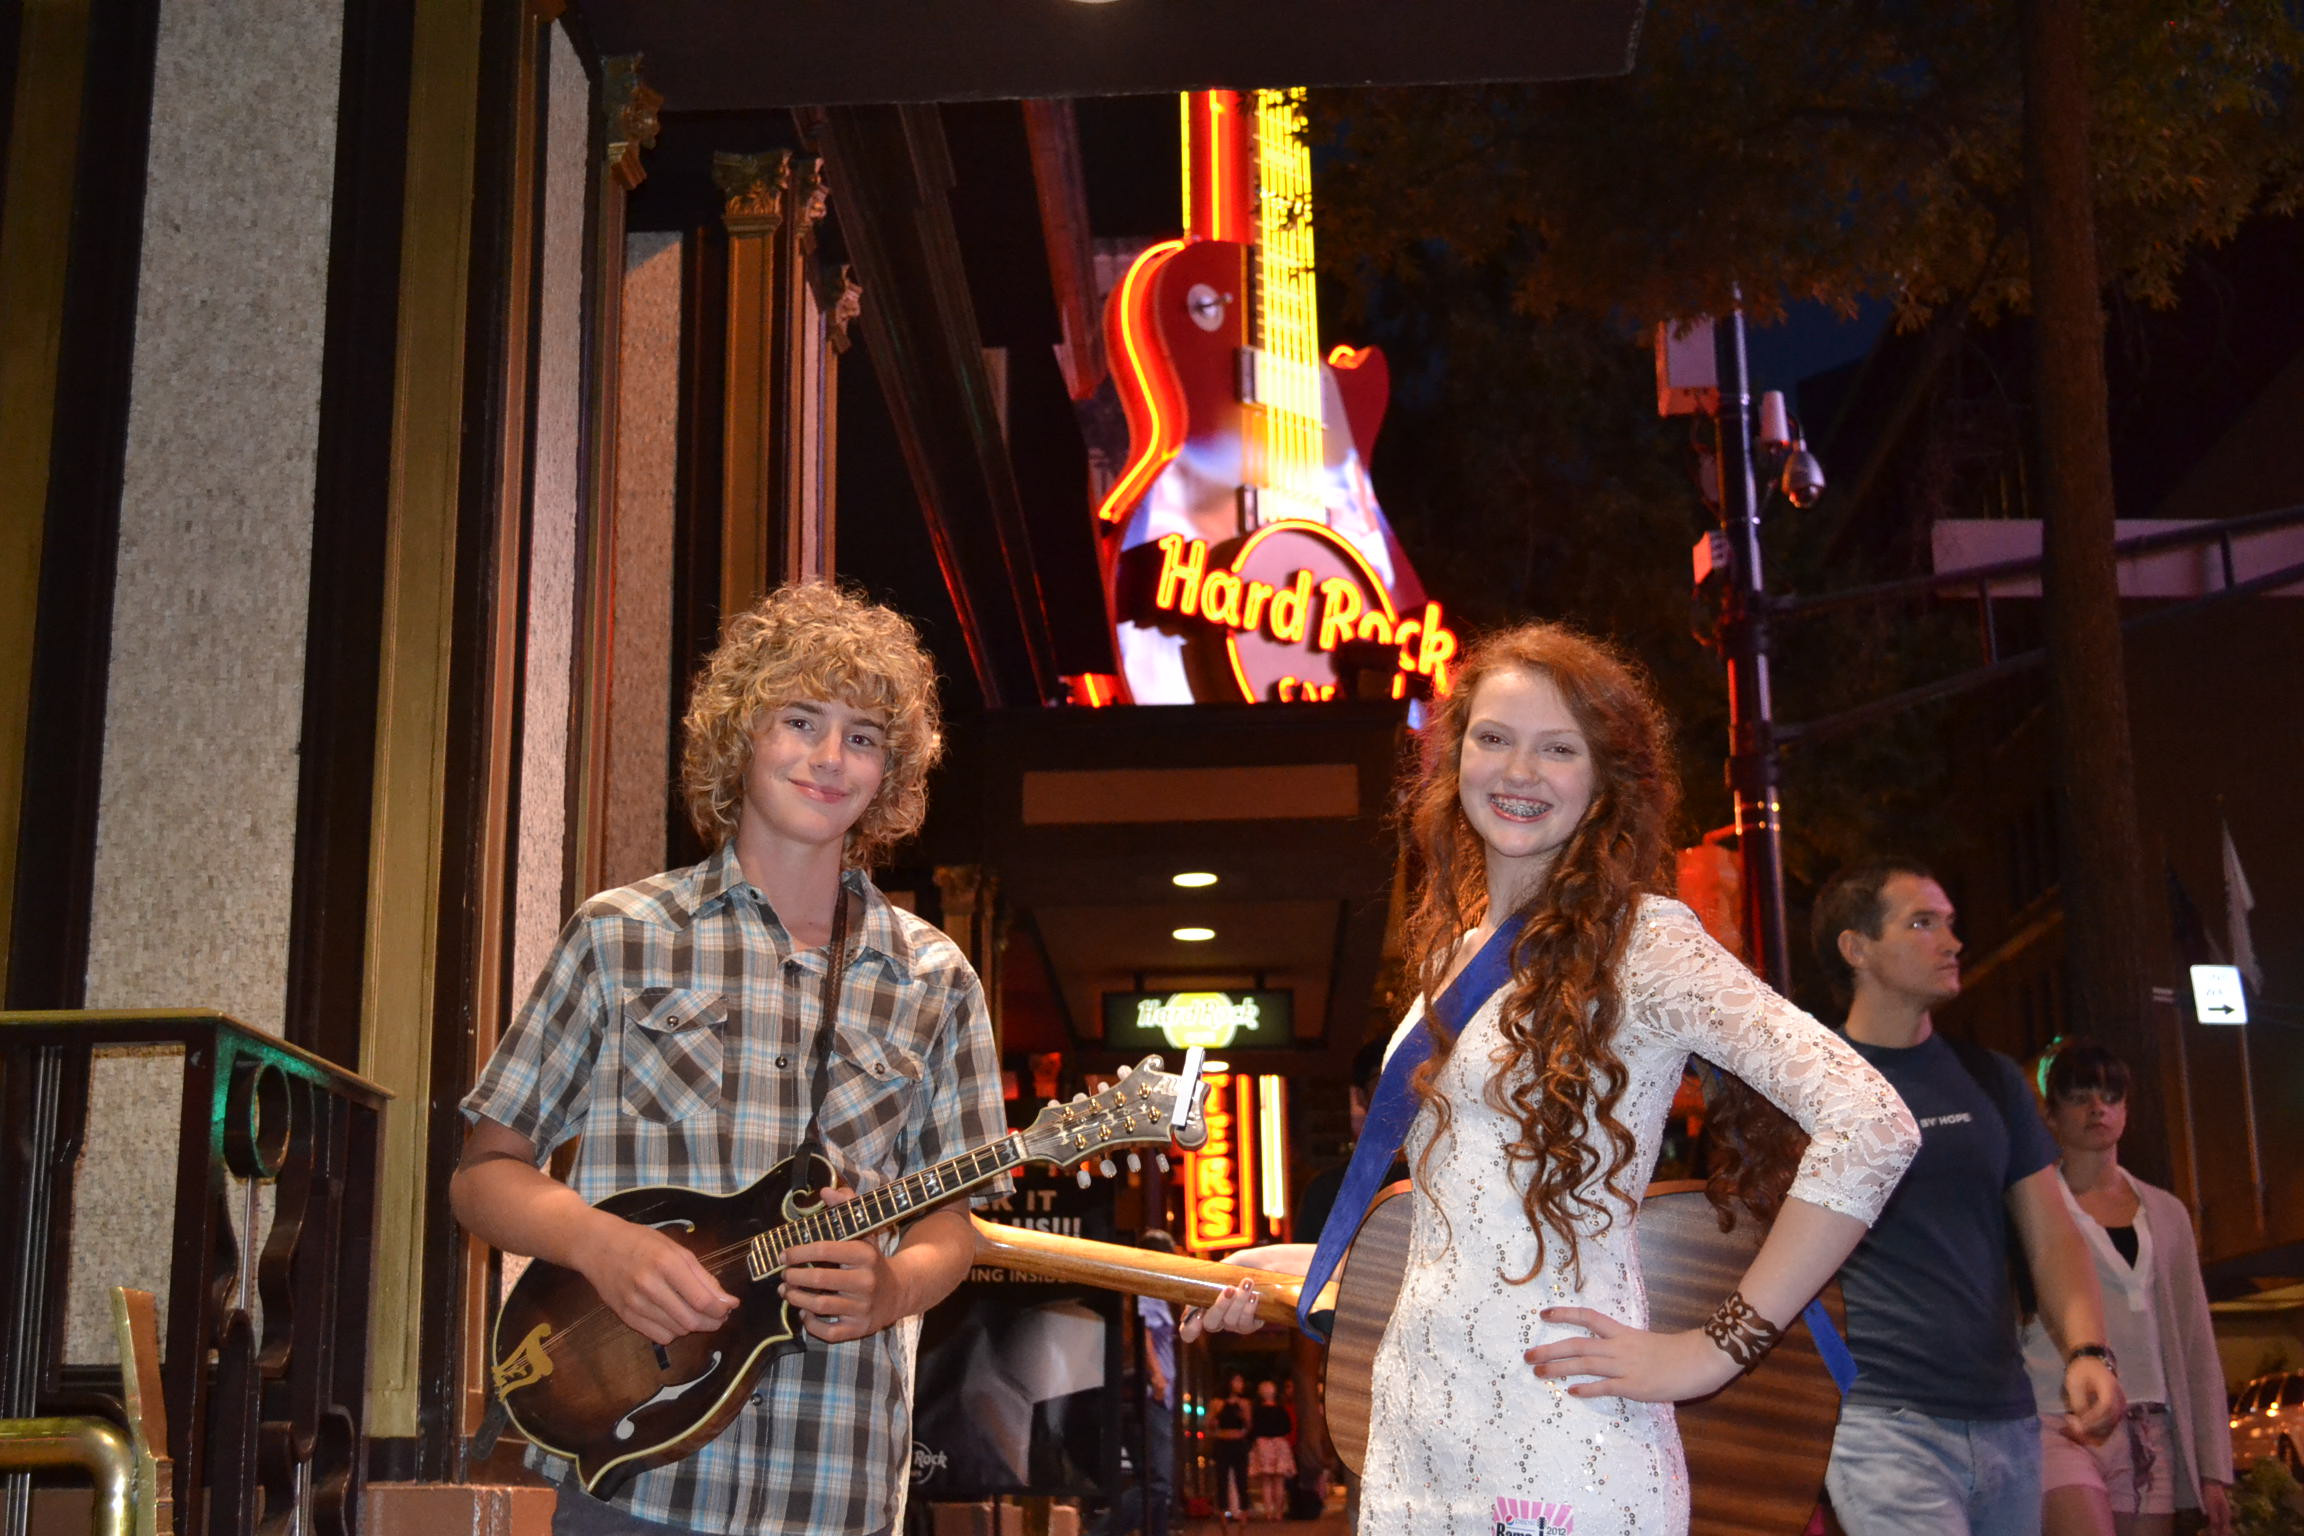 COPPER RIVER acoustic duo Max River & Jayna J http://www.reverbnation.com/copperriver performing at the Hard Rock Cafe-Velvet Underground 2014